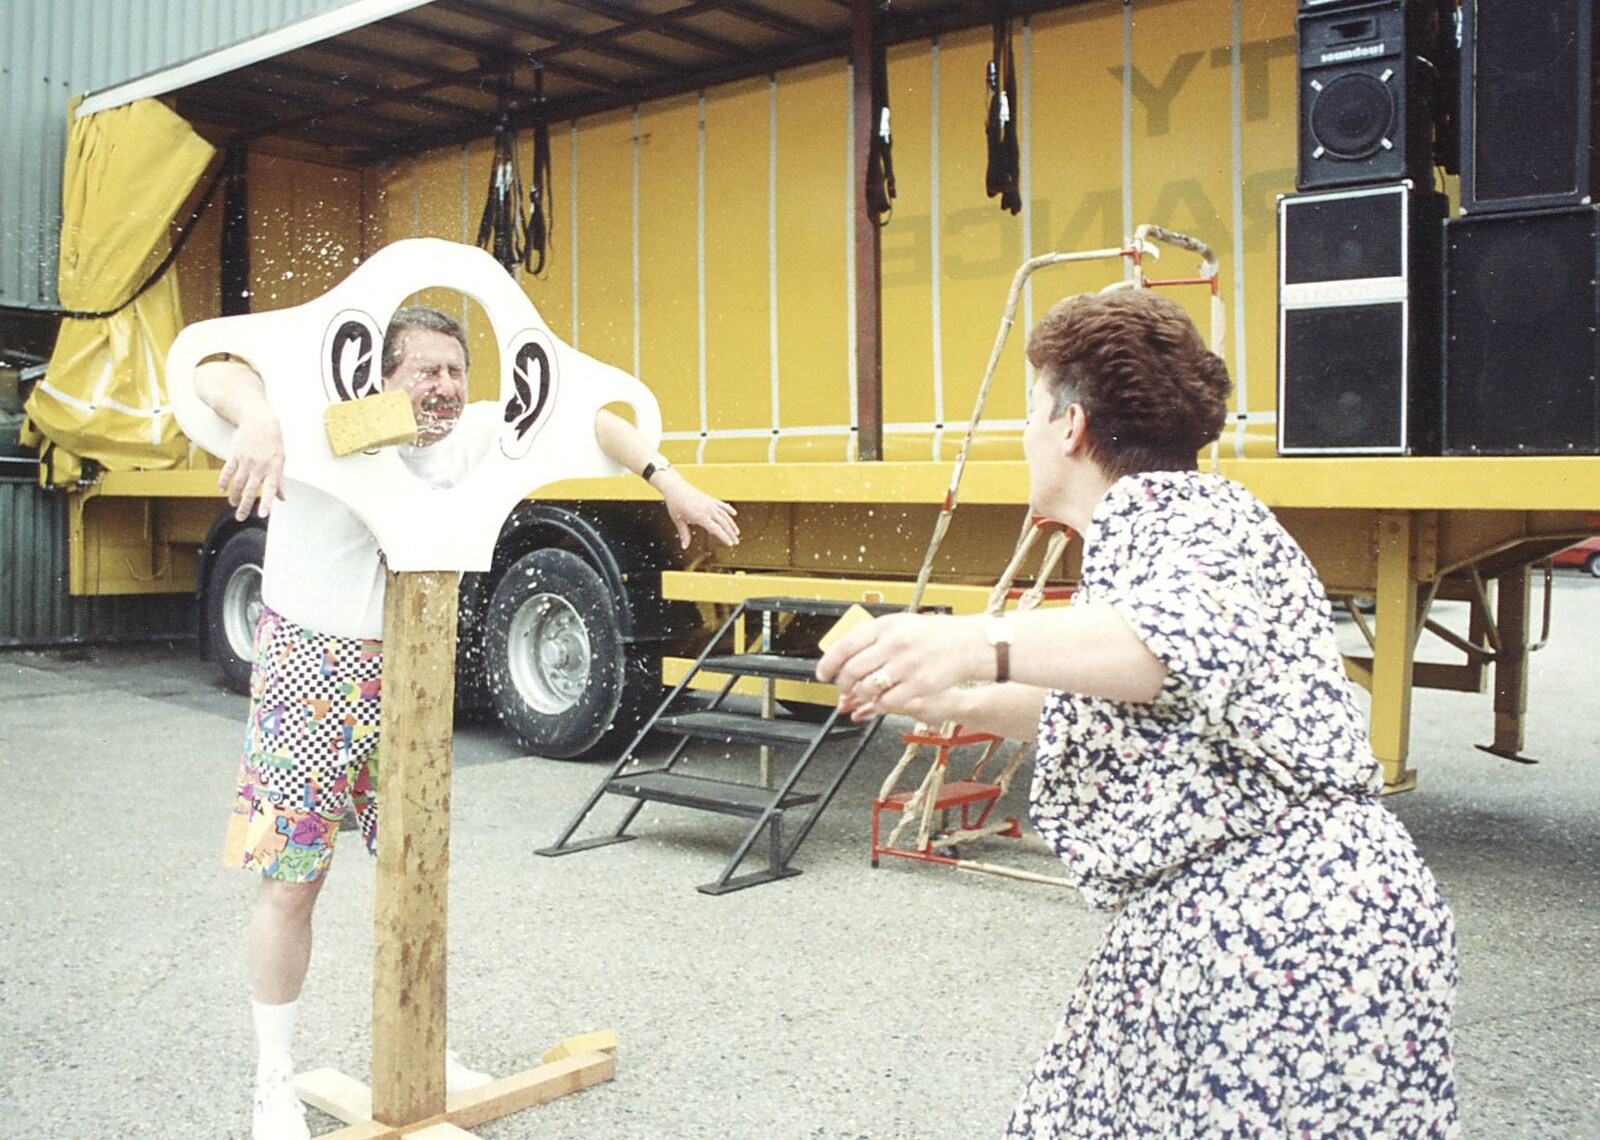 BPCC Anglia Web Open Day, Diss, Norfolk - 23rd June 1990: Linda gets well stuck in to soaking Brian the manager